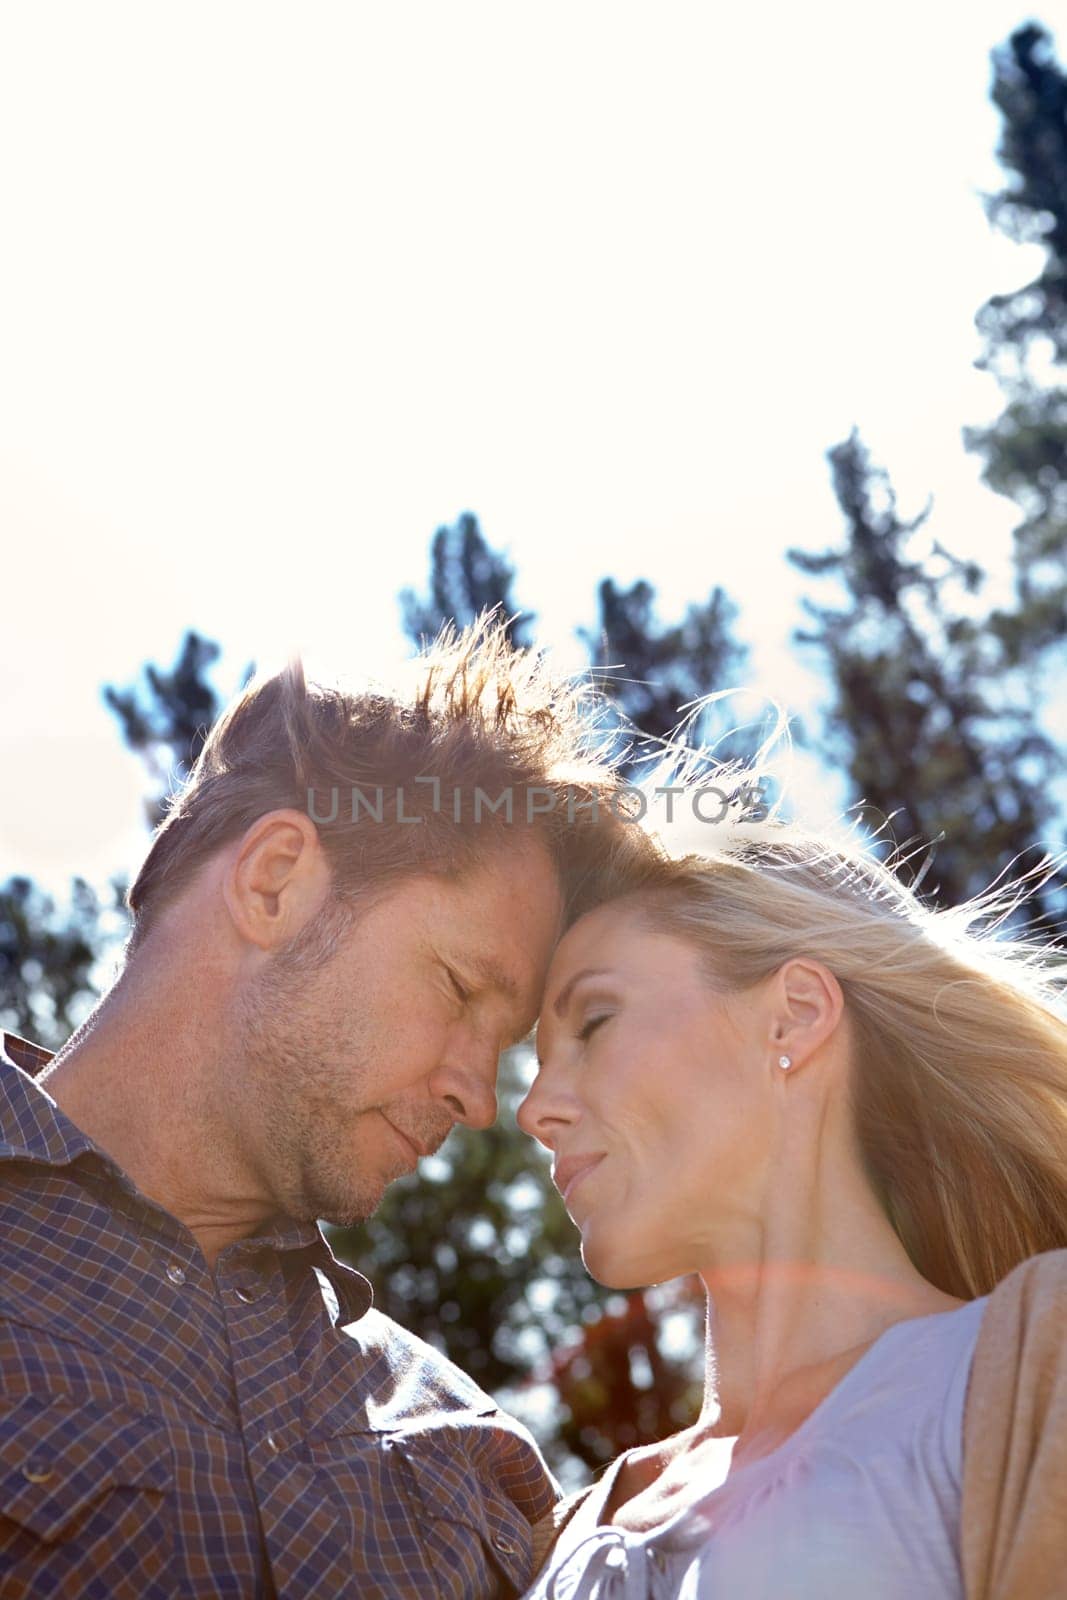 Love, embrace and couple by trees at countryside for adventure, weekend vacation and travel together. Sky, man and woman outdoors in nature for summer holiday, romance and getaway trip in low angle.